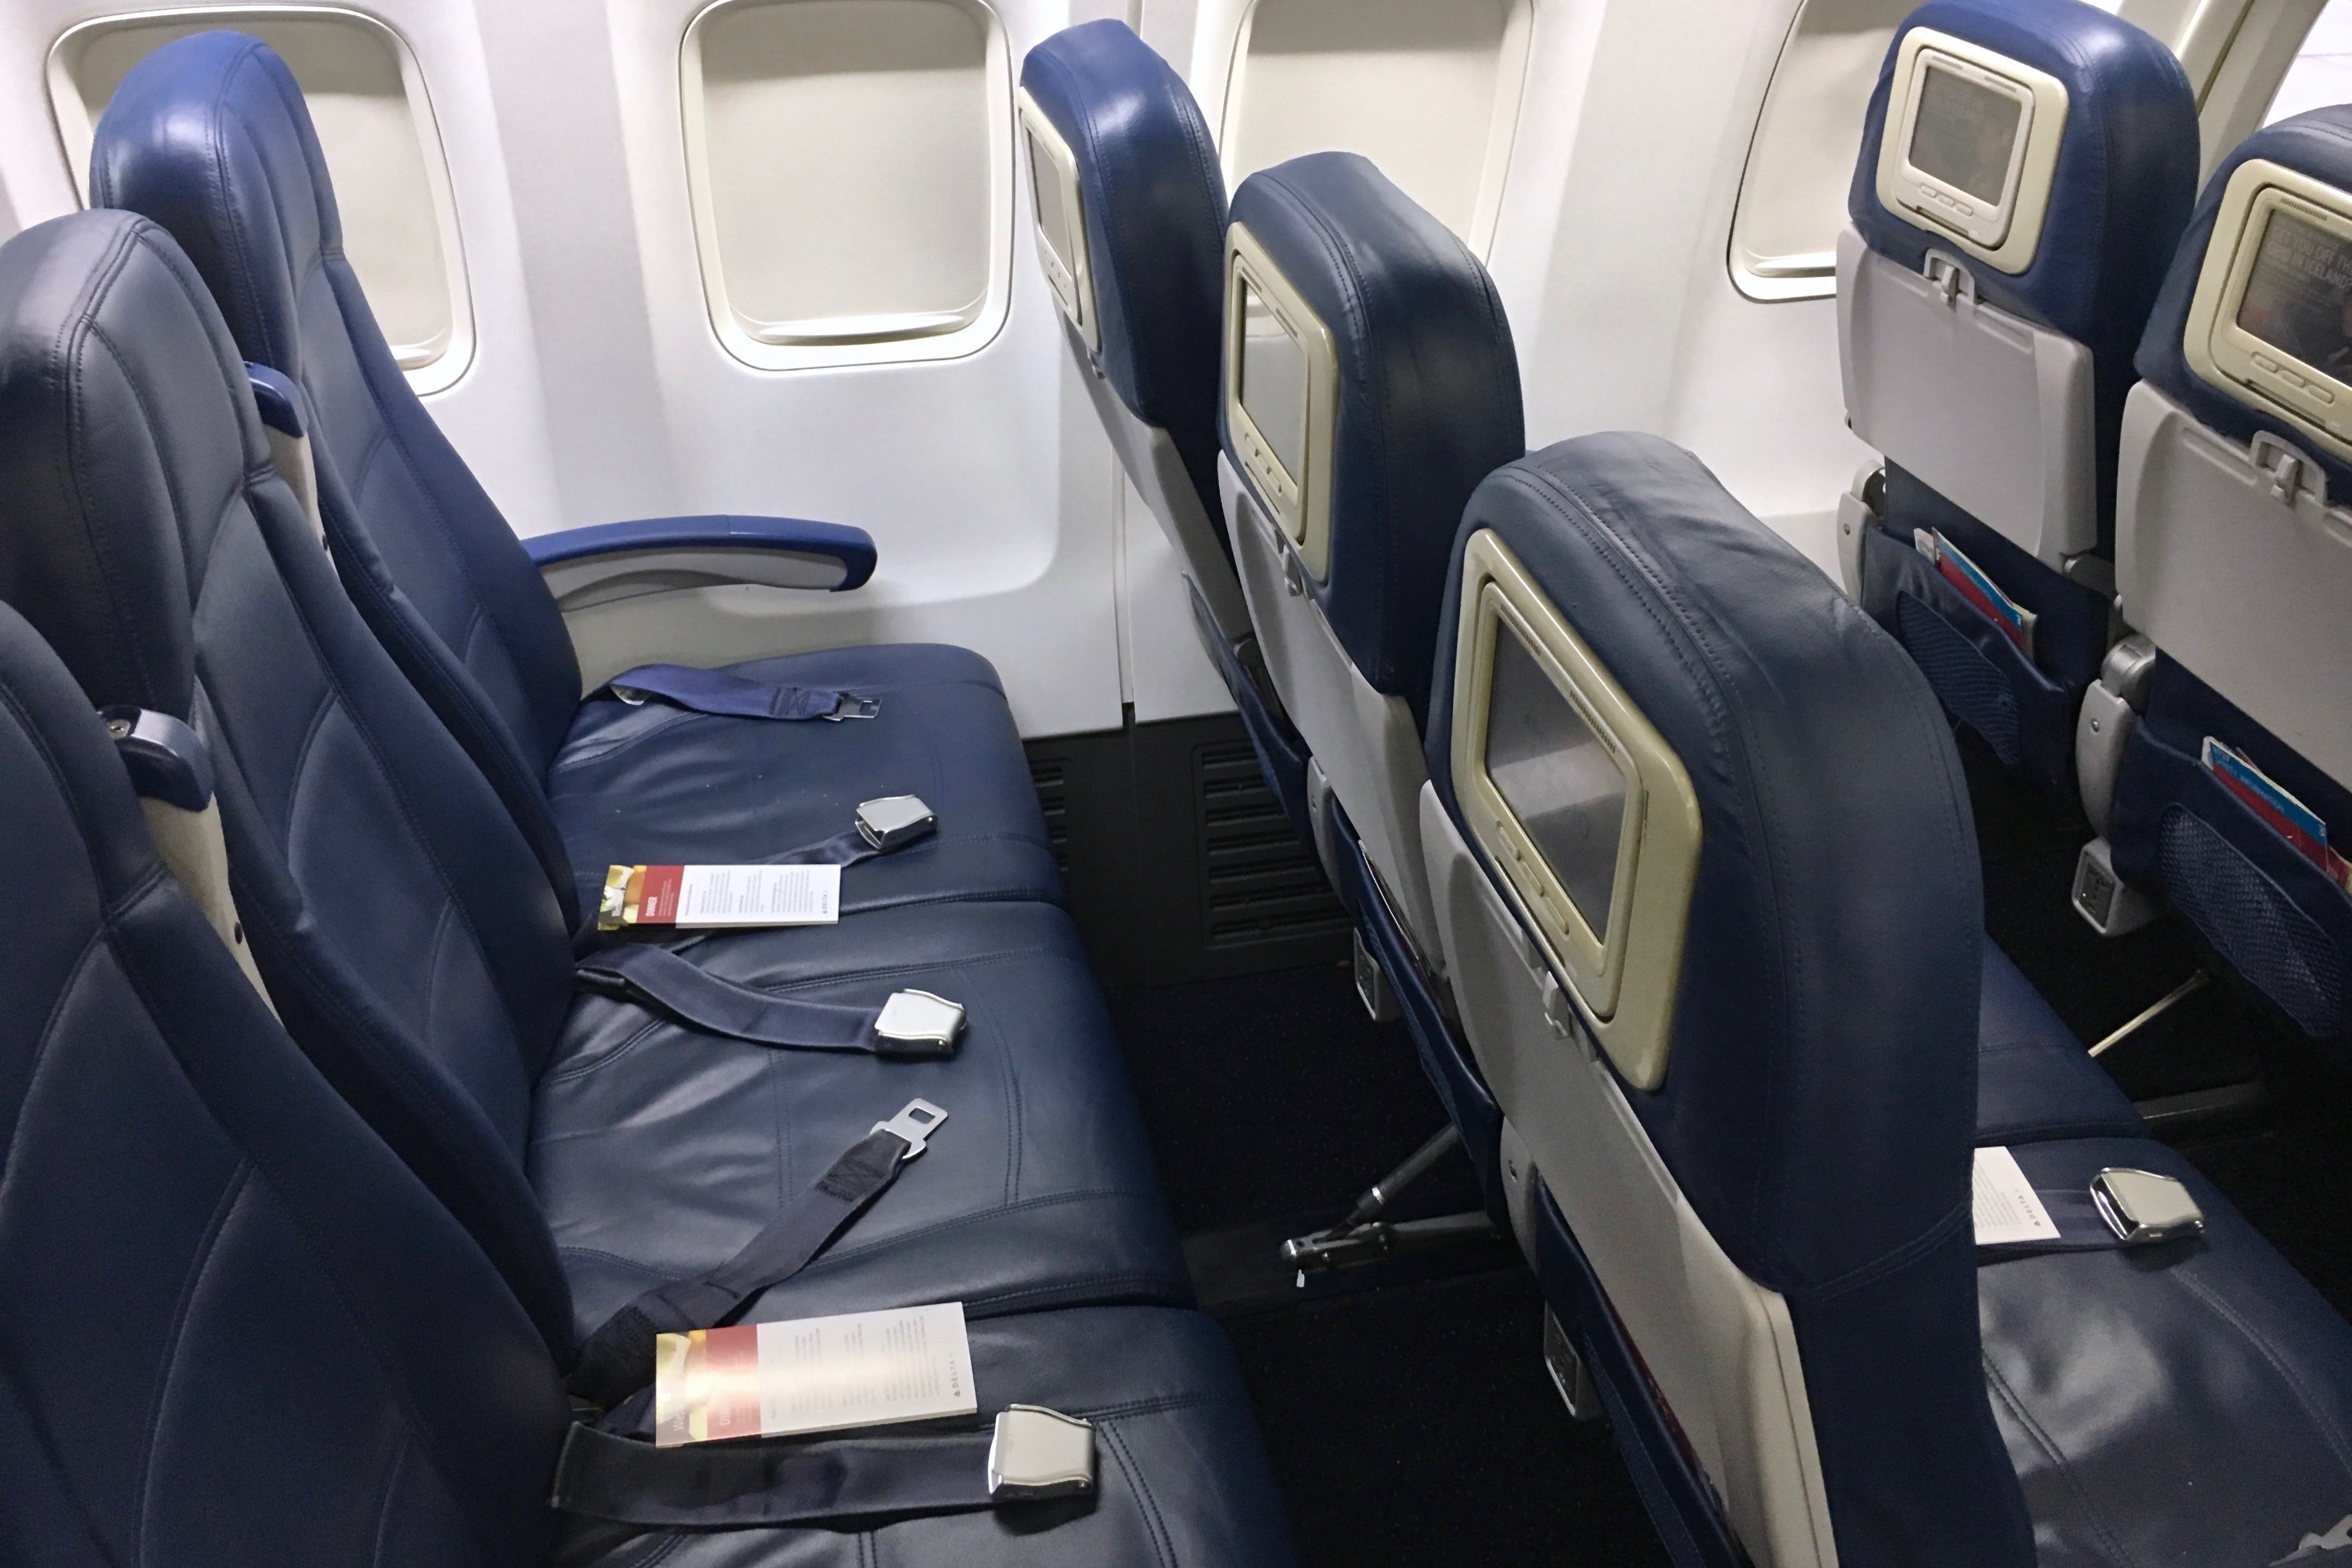 United Airlines, Delta Airlines Basic Economy Review